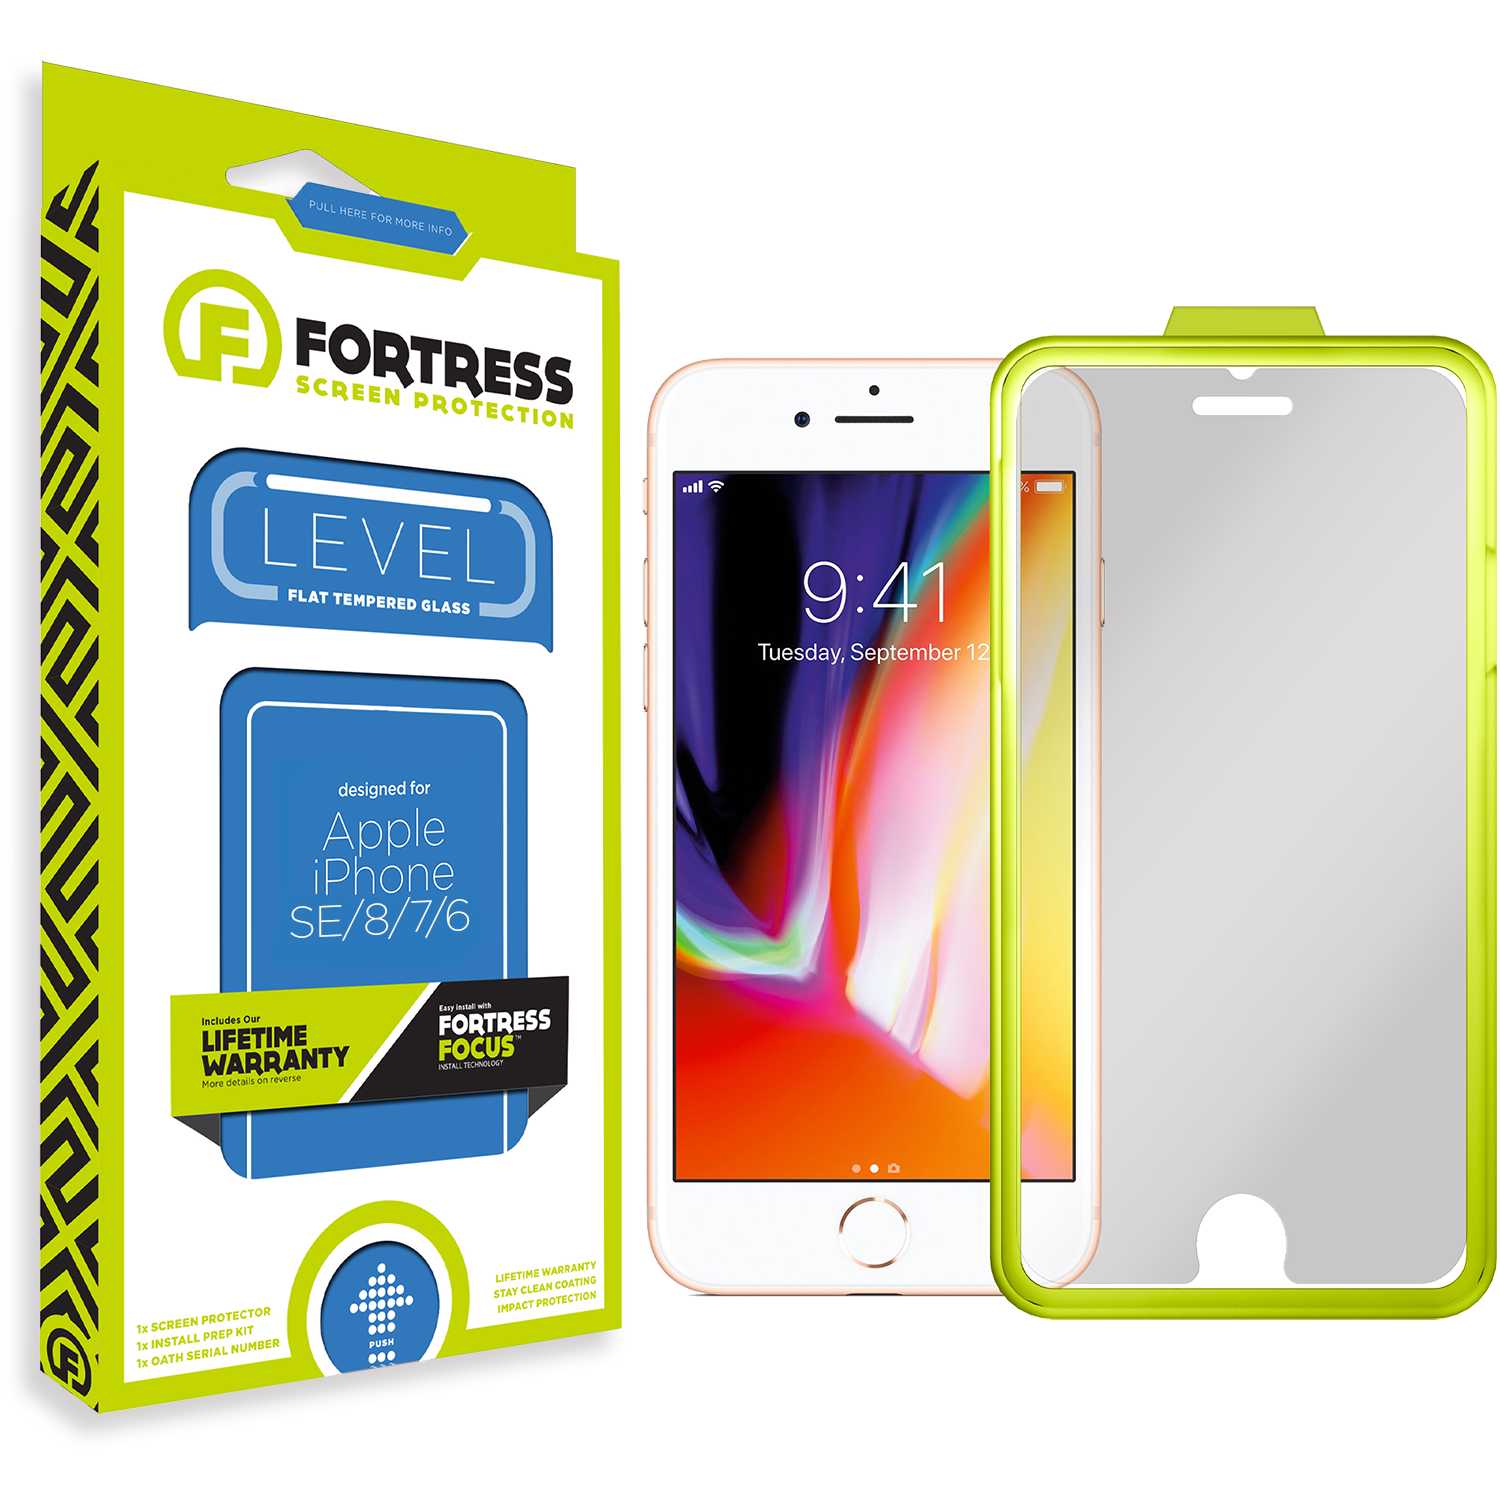 Fortress iPhone SE/8/7 Screen Protector $0CoverageInstallTool Scooch Screen Protector